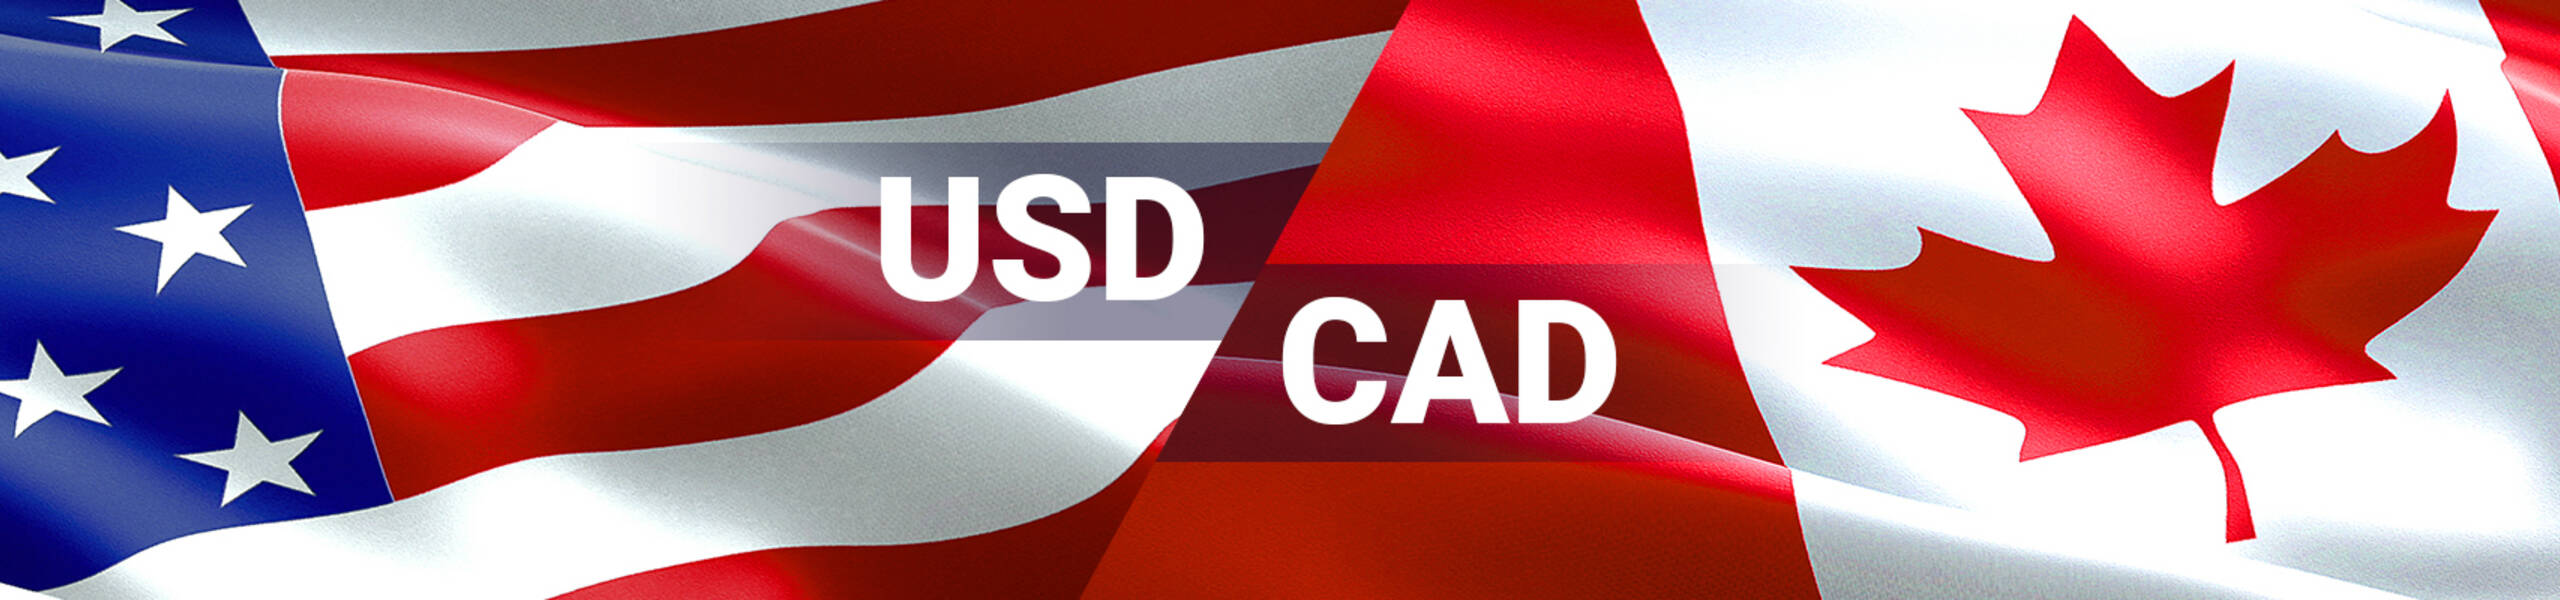 USD/CAD reached buy target 1.3600